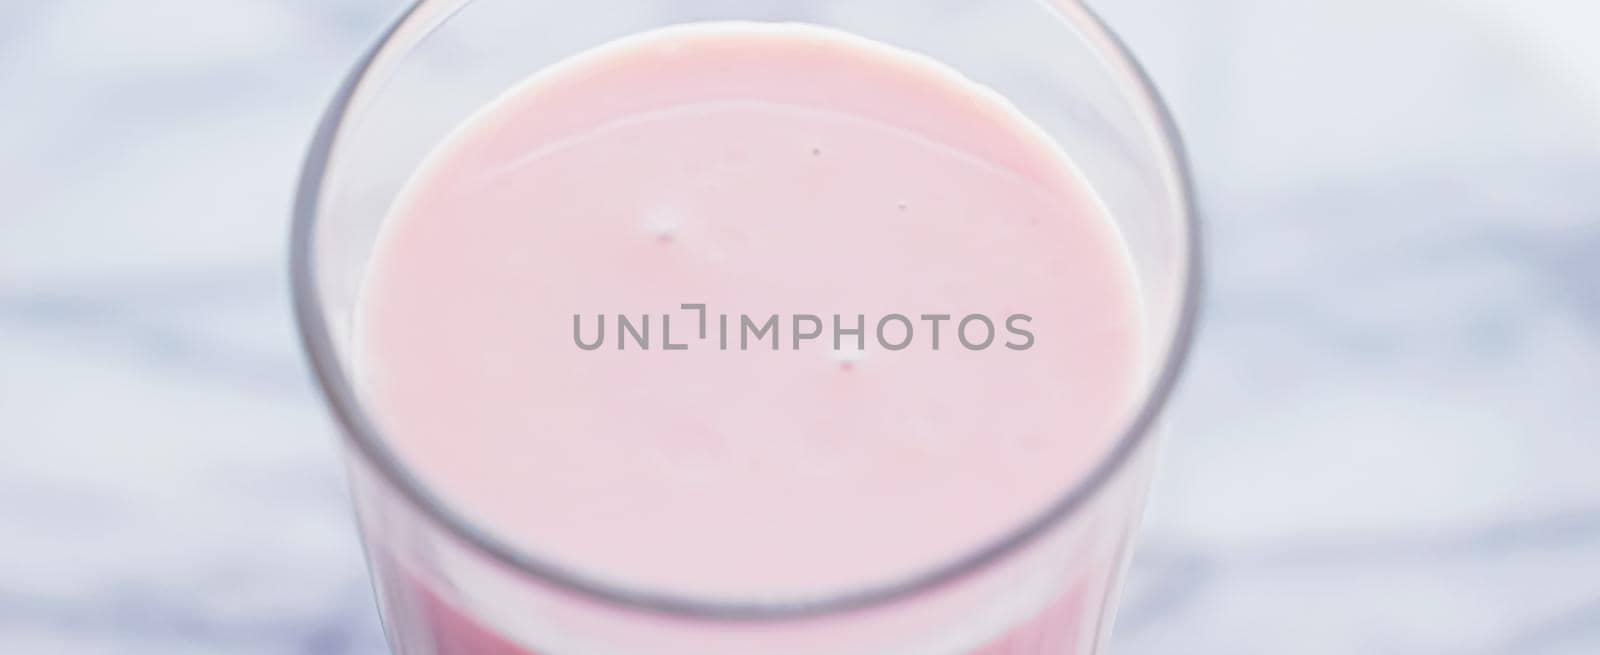 Strawberry milk on marble background as sweet drink, food service and meal delivery concept